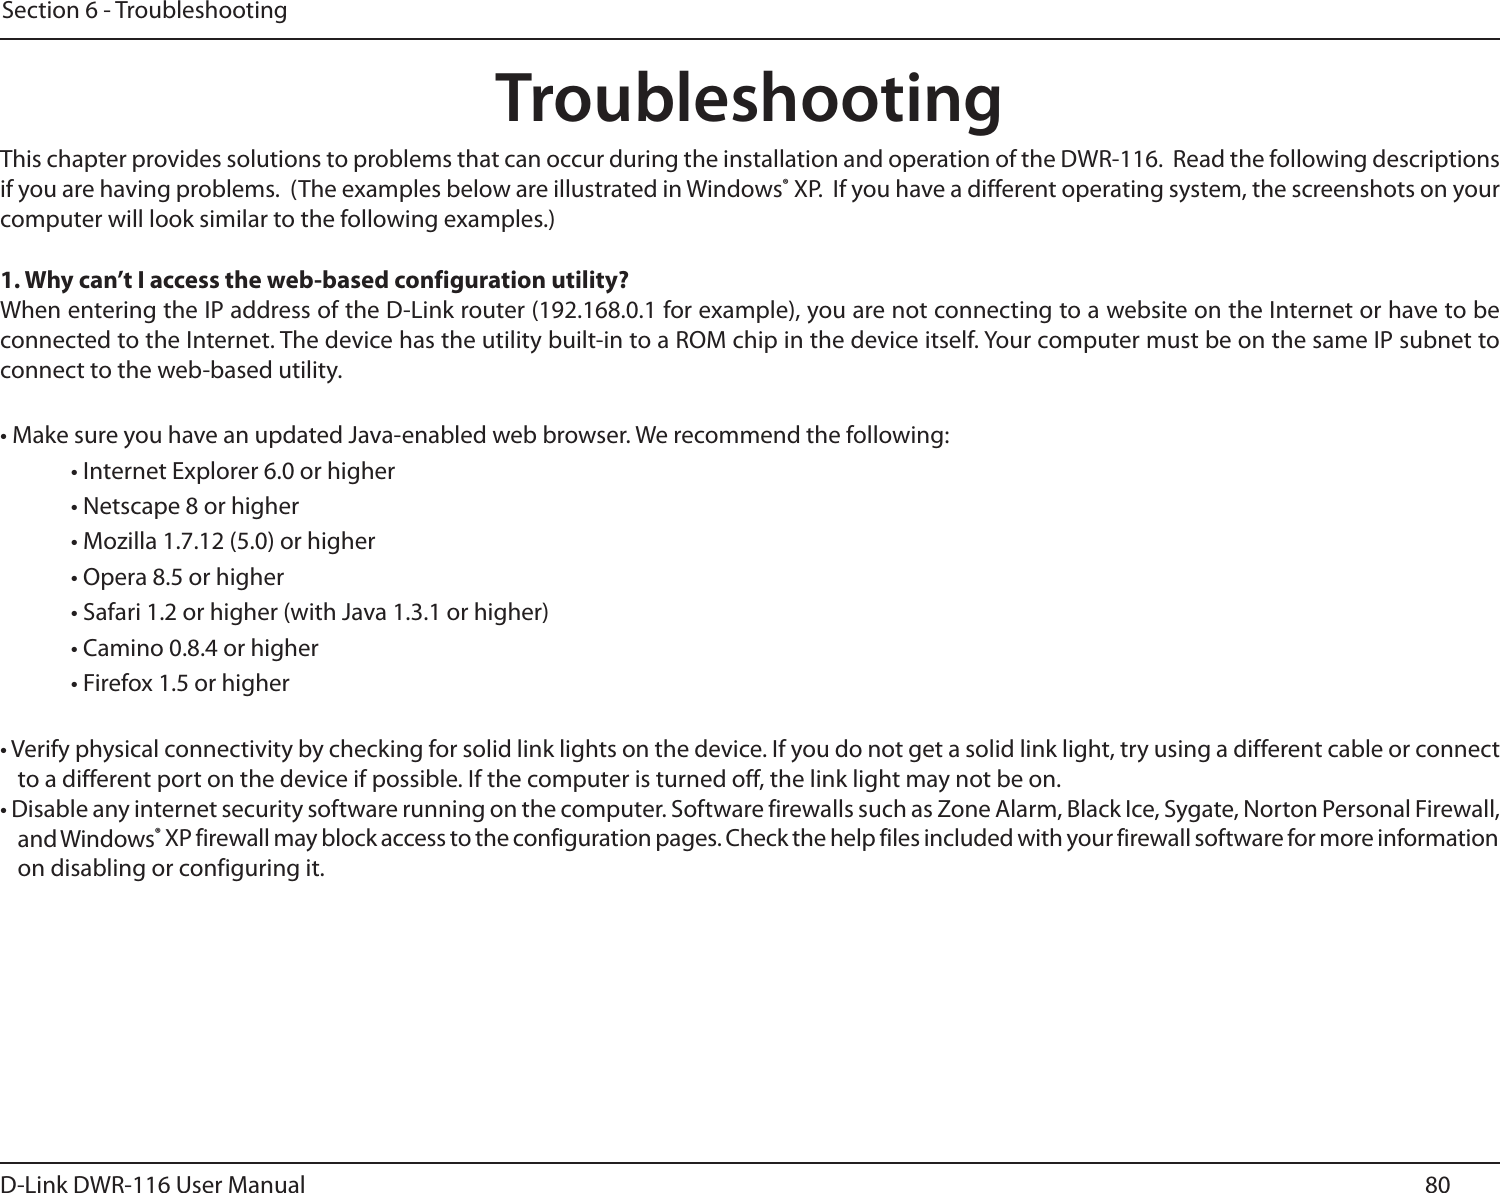 80D-Link DWR-116 User ManualSection 6 - TroubleshootingTroubleshootingThis chapter provides solutions to problems that can occur during the installation and operation of the DWR-116.  Read the following descriptions if you are having problems.  (The examples below are illustrated in Windows® XP.  If you have a different operating system, the screenshots on your computer will look similar to the following examples.)1. Why can’t I access the web-based configuration utility?When entering the IP address of the D-Link router (192.168.0.1 for example), you are not connecting to a website on the Internet or have to be connected to the Internet. The device has the utility built-in to a ROM chip in the device itself. Your computer must be on the same IP subnet to connect to the web-based utility. • Make sure you have an updated Java-enabled web browser. We recommend the following: • Internet Explorer 6.0 or higher • Netscape 8 or higher • Mozilla 1.7.12 (5.0) or higher • Opera 8.5 or higher • Safari 1.2 or higher (with Java 1.3.1 or higher) • Camino 0.8.4 or higher • Firefox 1.5 or higher • Verify physical connectivity by checking for solid link lights on the device. If you do not get a solid link light, try using a different cable or connect to a different port on the device if possible. If the computer is turned off, the link light may not be on.• Disable any internet security software running on the computer. Software firewalls such as Zone Alarm, Black Ice, Sygate, Norton Personal Firewall, and Windows® XP firewall may block access to the configuration pages. Check the help files included with your firewall software for more information on disabling or configuring it.